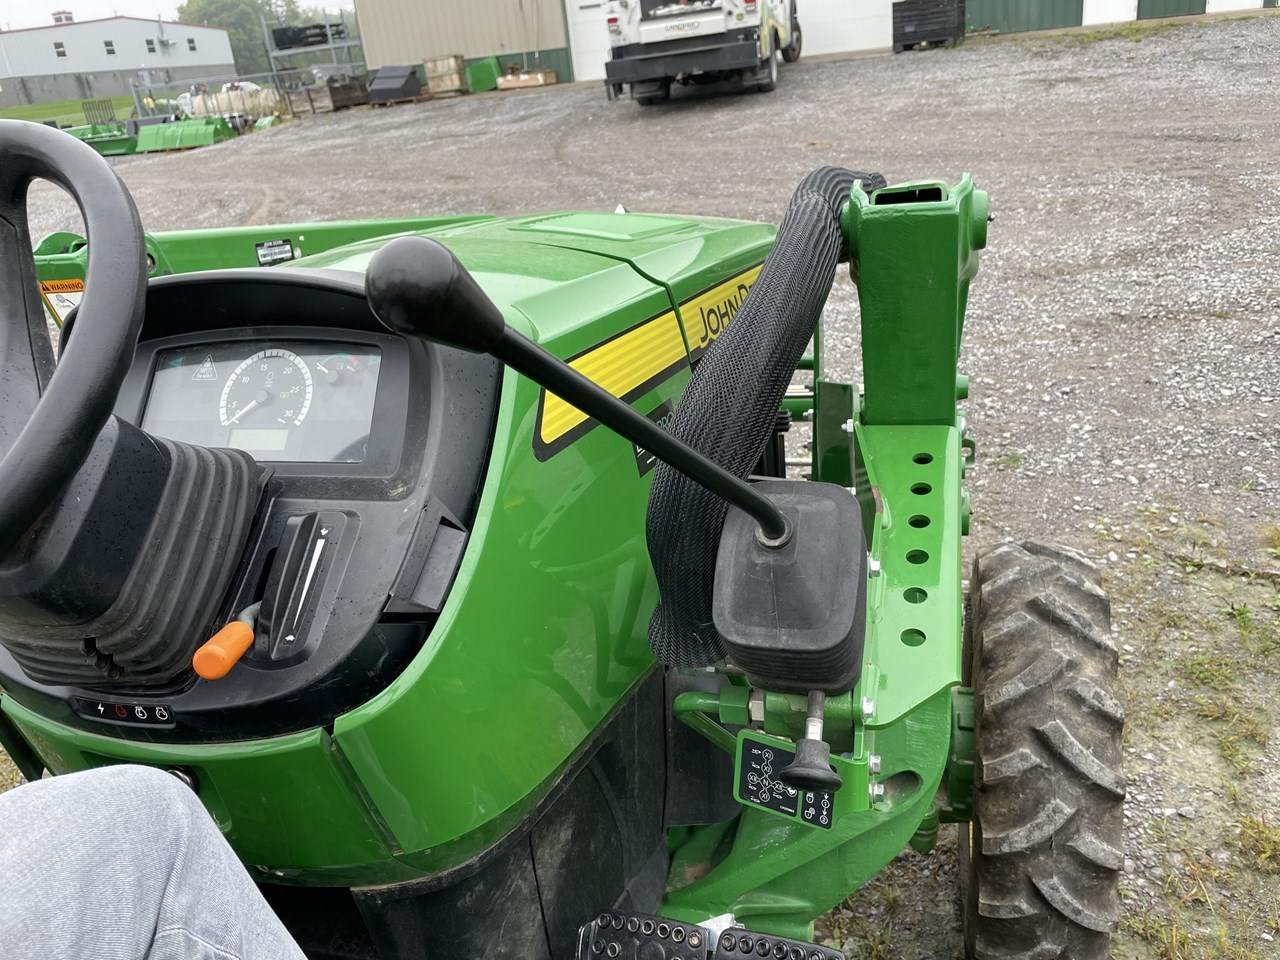 2019 John Deere 4066M Tractor - Compact Utility For Sale